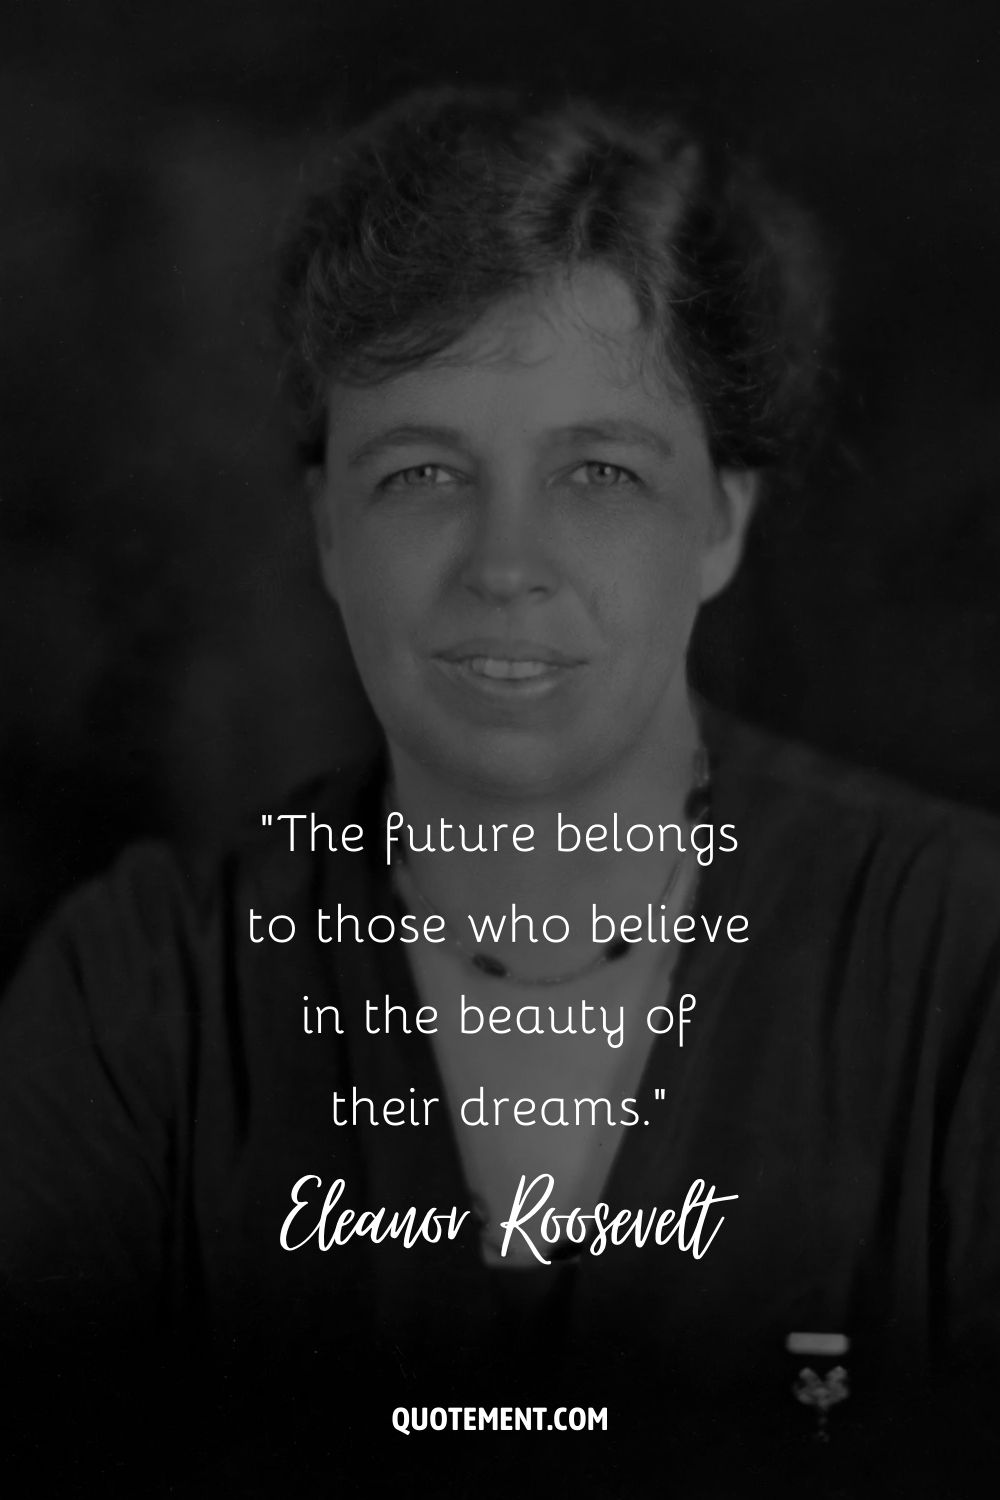 Eleanor Roosevelt with a warm expression representing a quote about the future.
